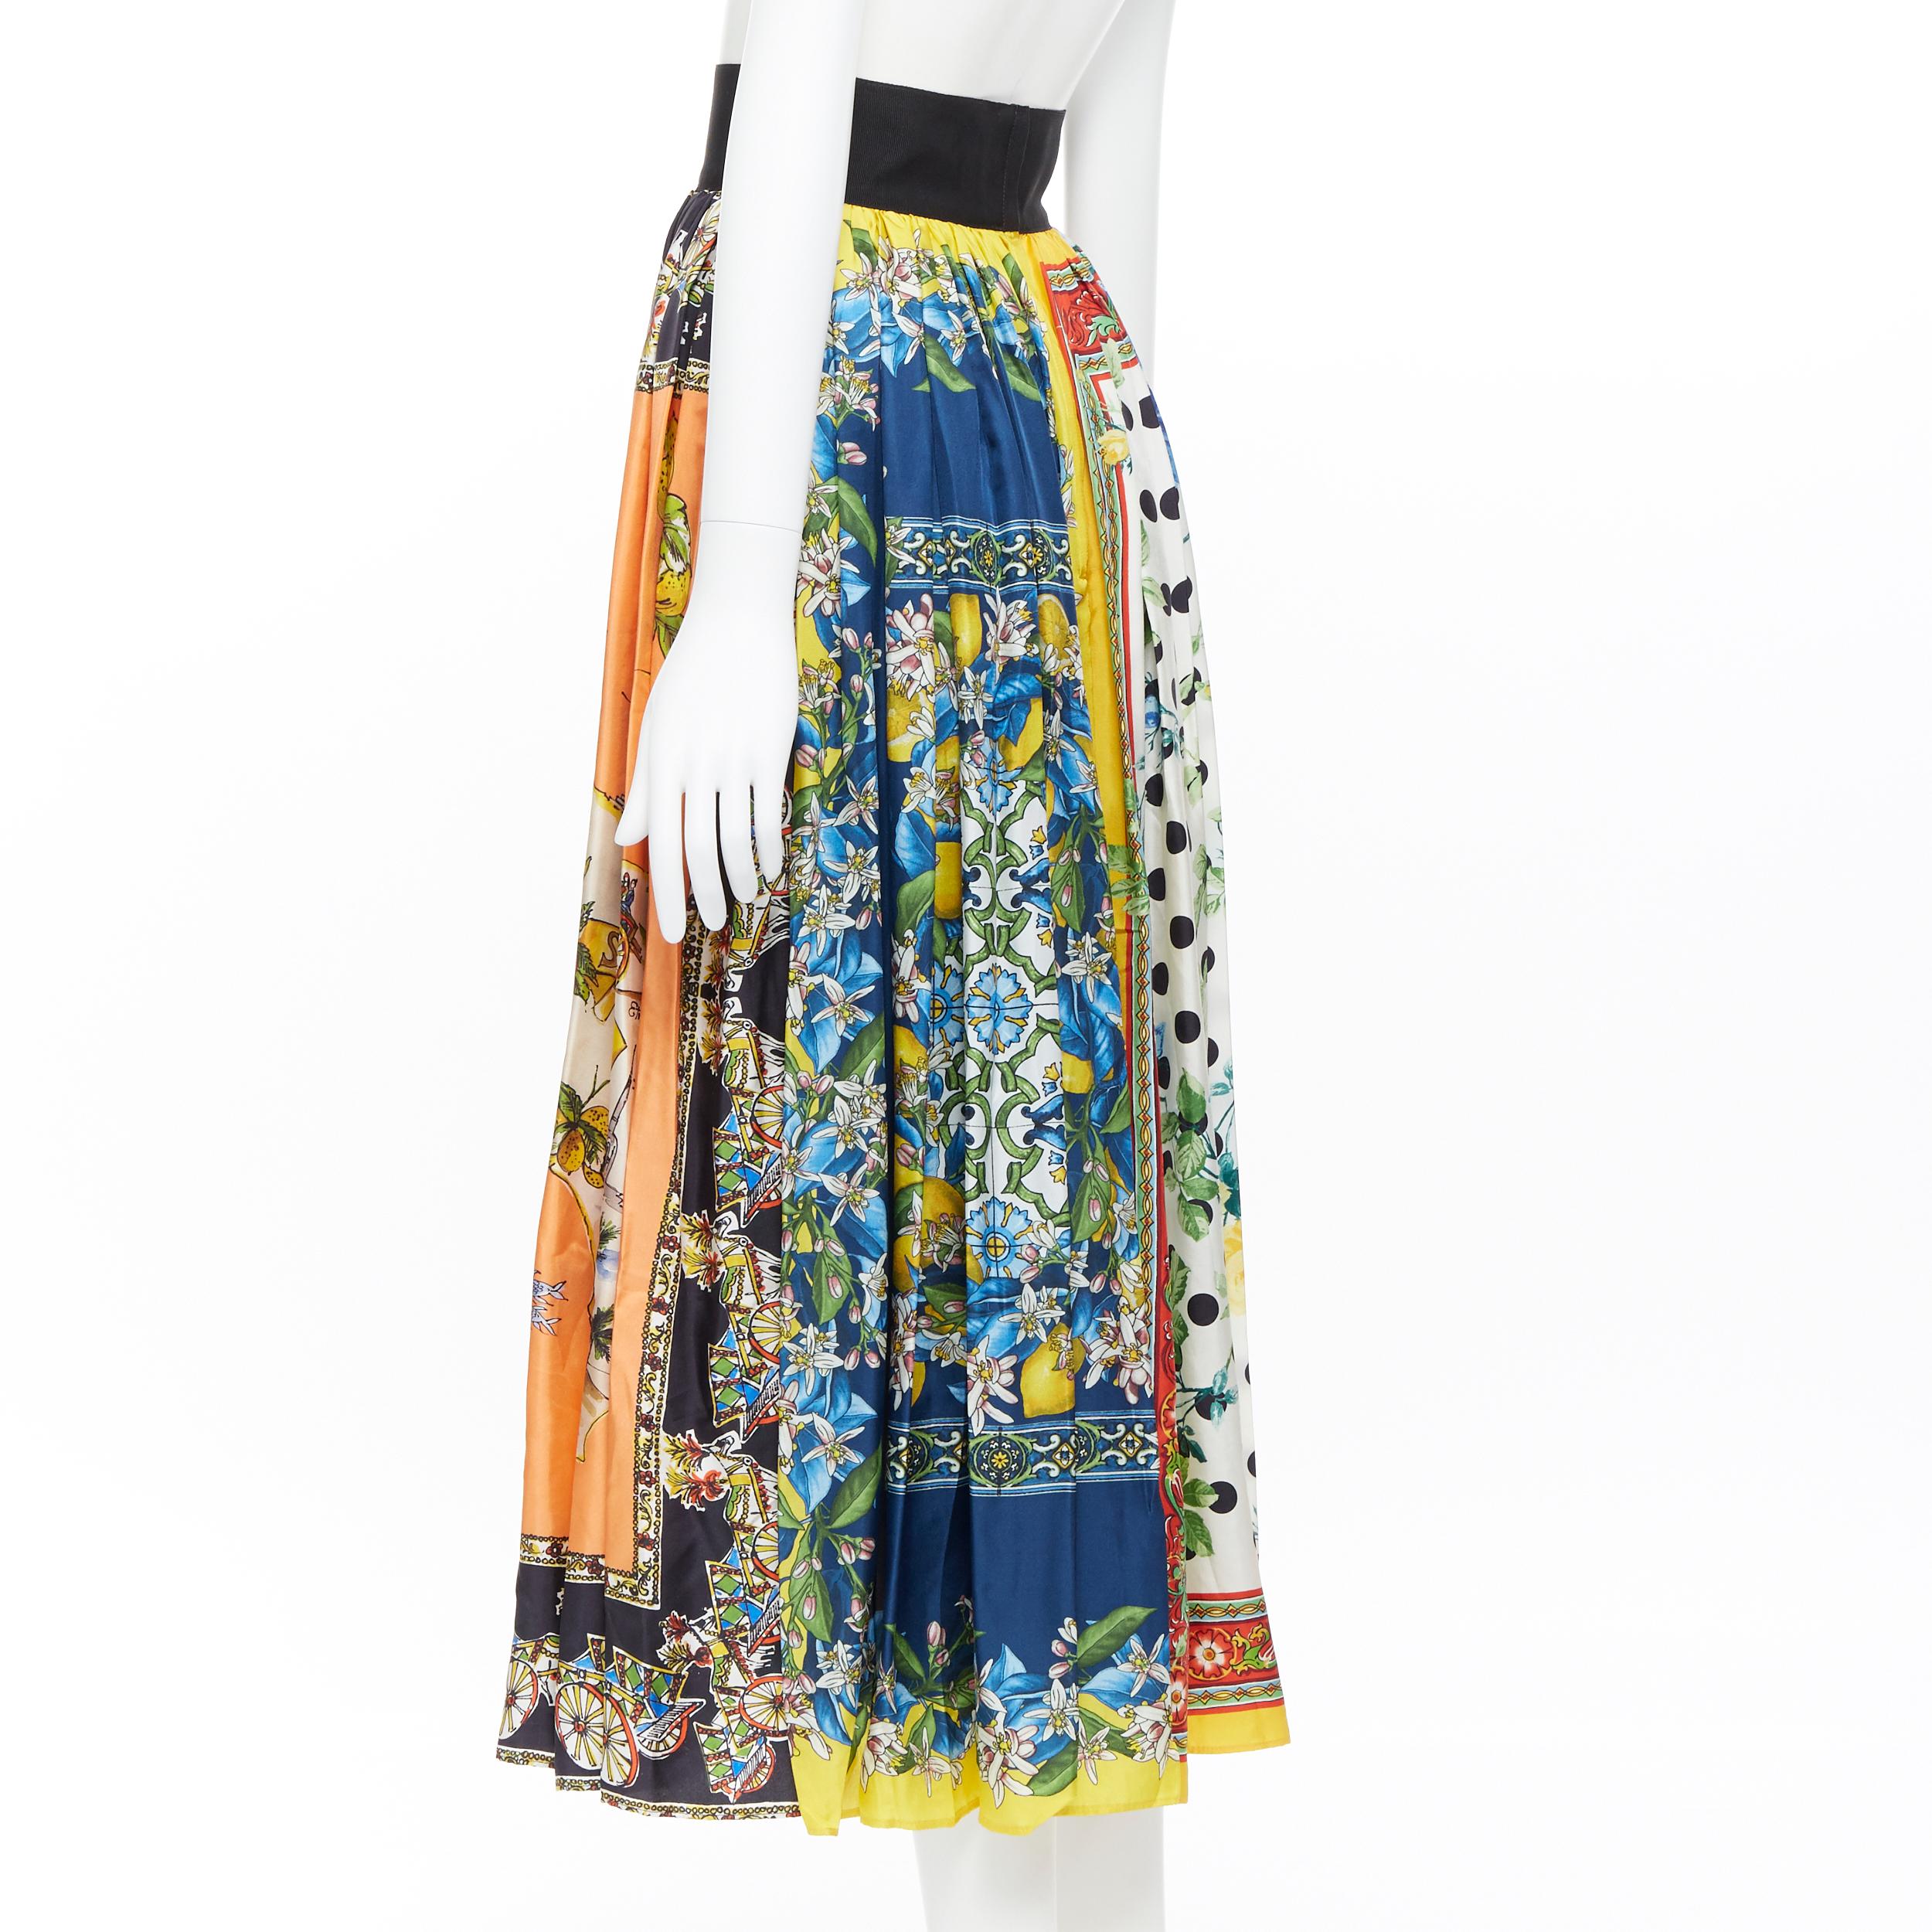 DOLCE GABBANA printed silk mixed archive Majolica print pleated midi skirt IT36
Brand: Dolce Gabbana
Designer: Dolce Gabbana
Model Name / Style: Silk skirt
Material: Silk blend
Color: Multicolour
Pattern: Floral
Closure: Zip
Extra Detail:
Made in: